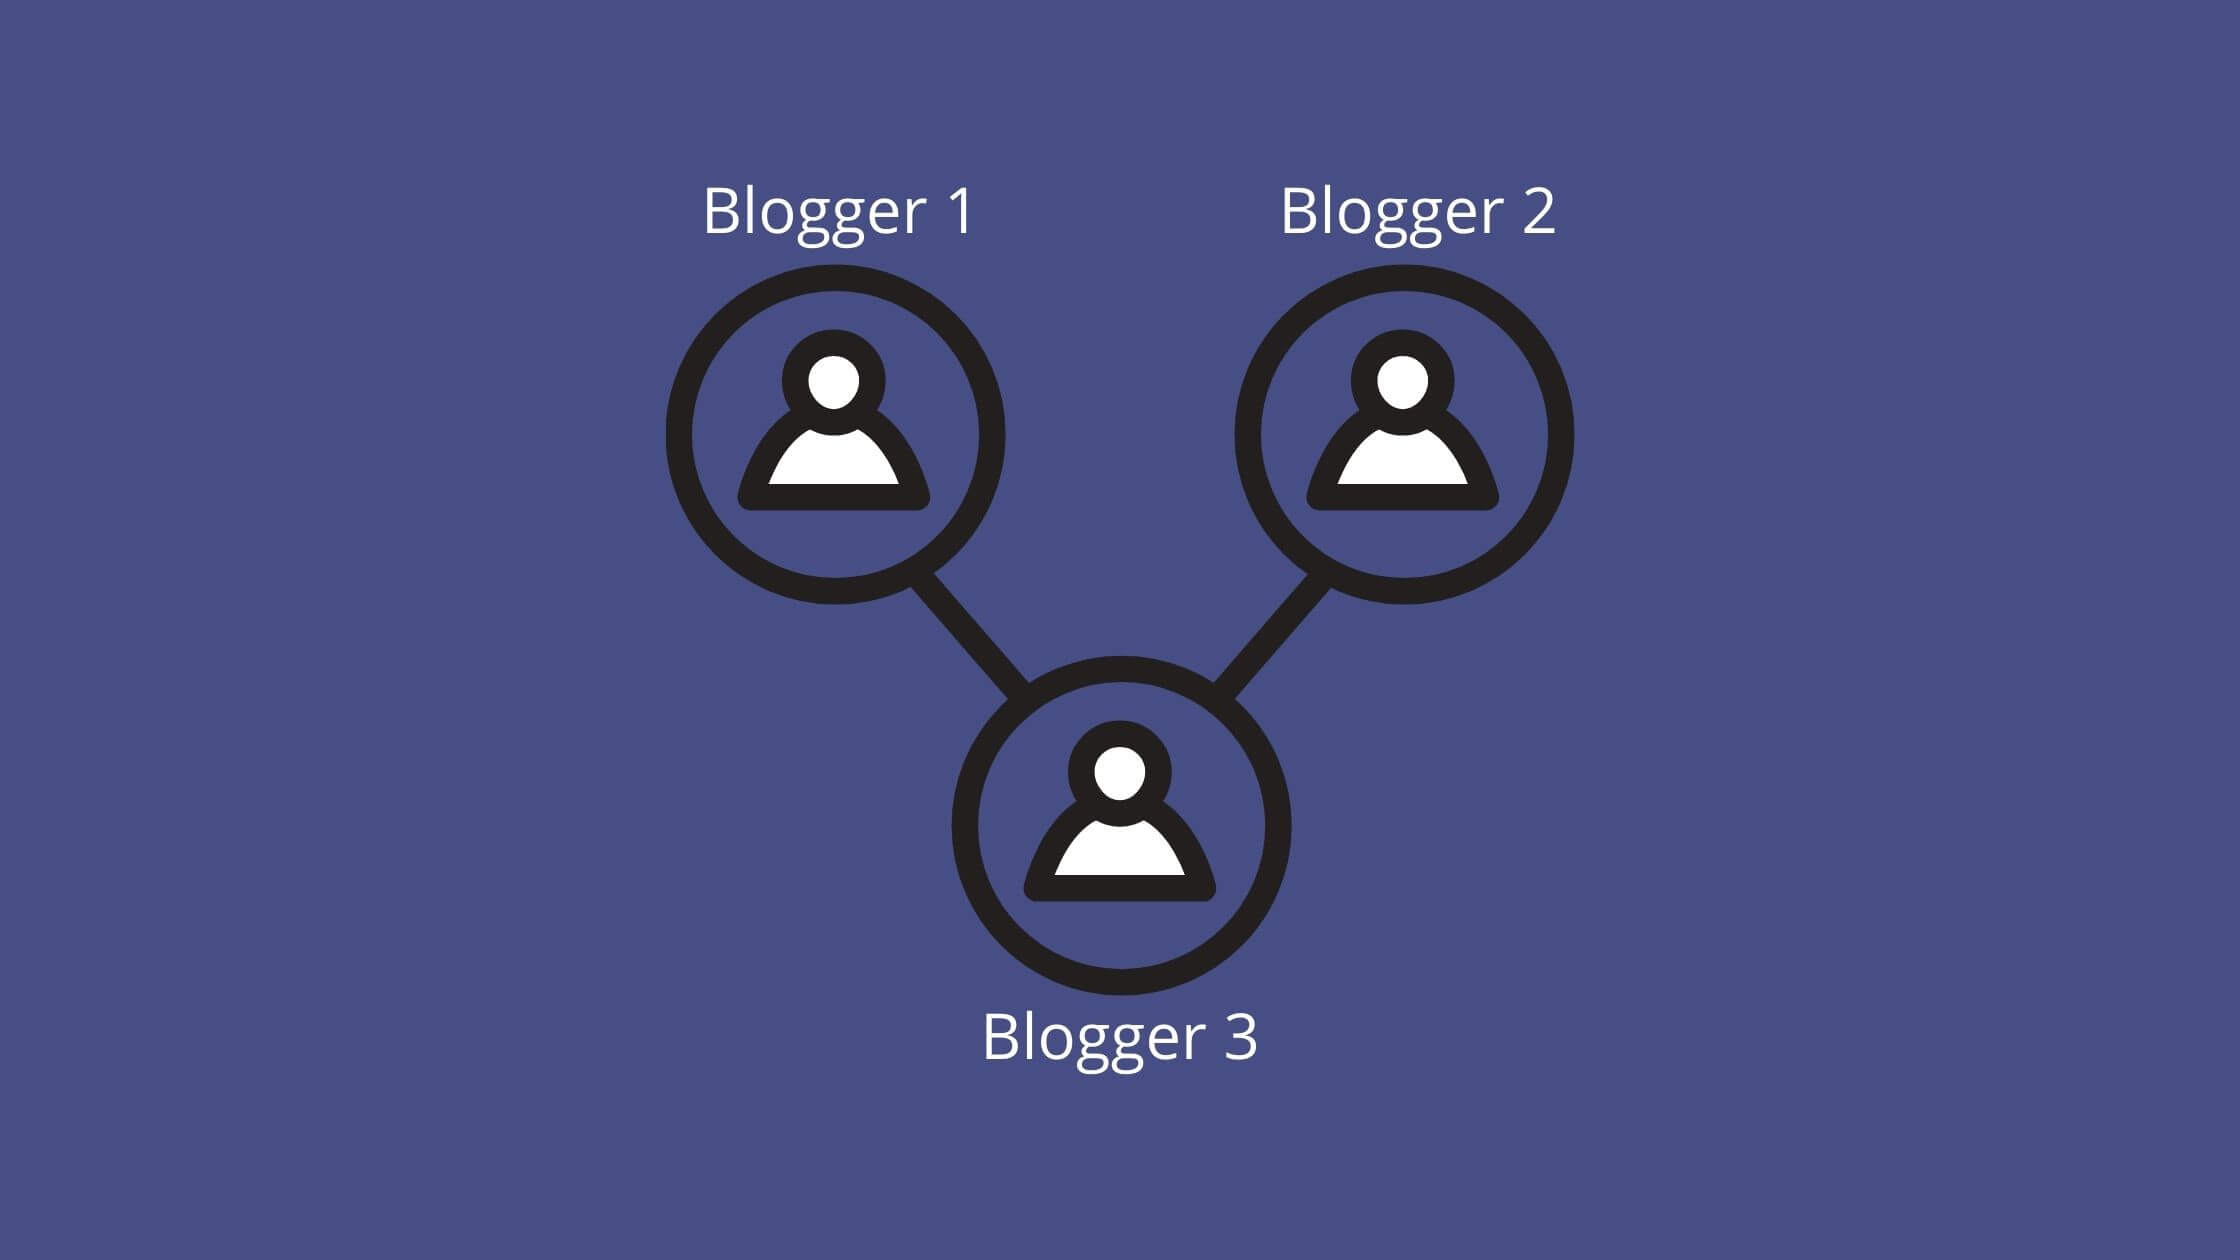 Branding your blog by connecting with other bloggers